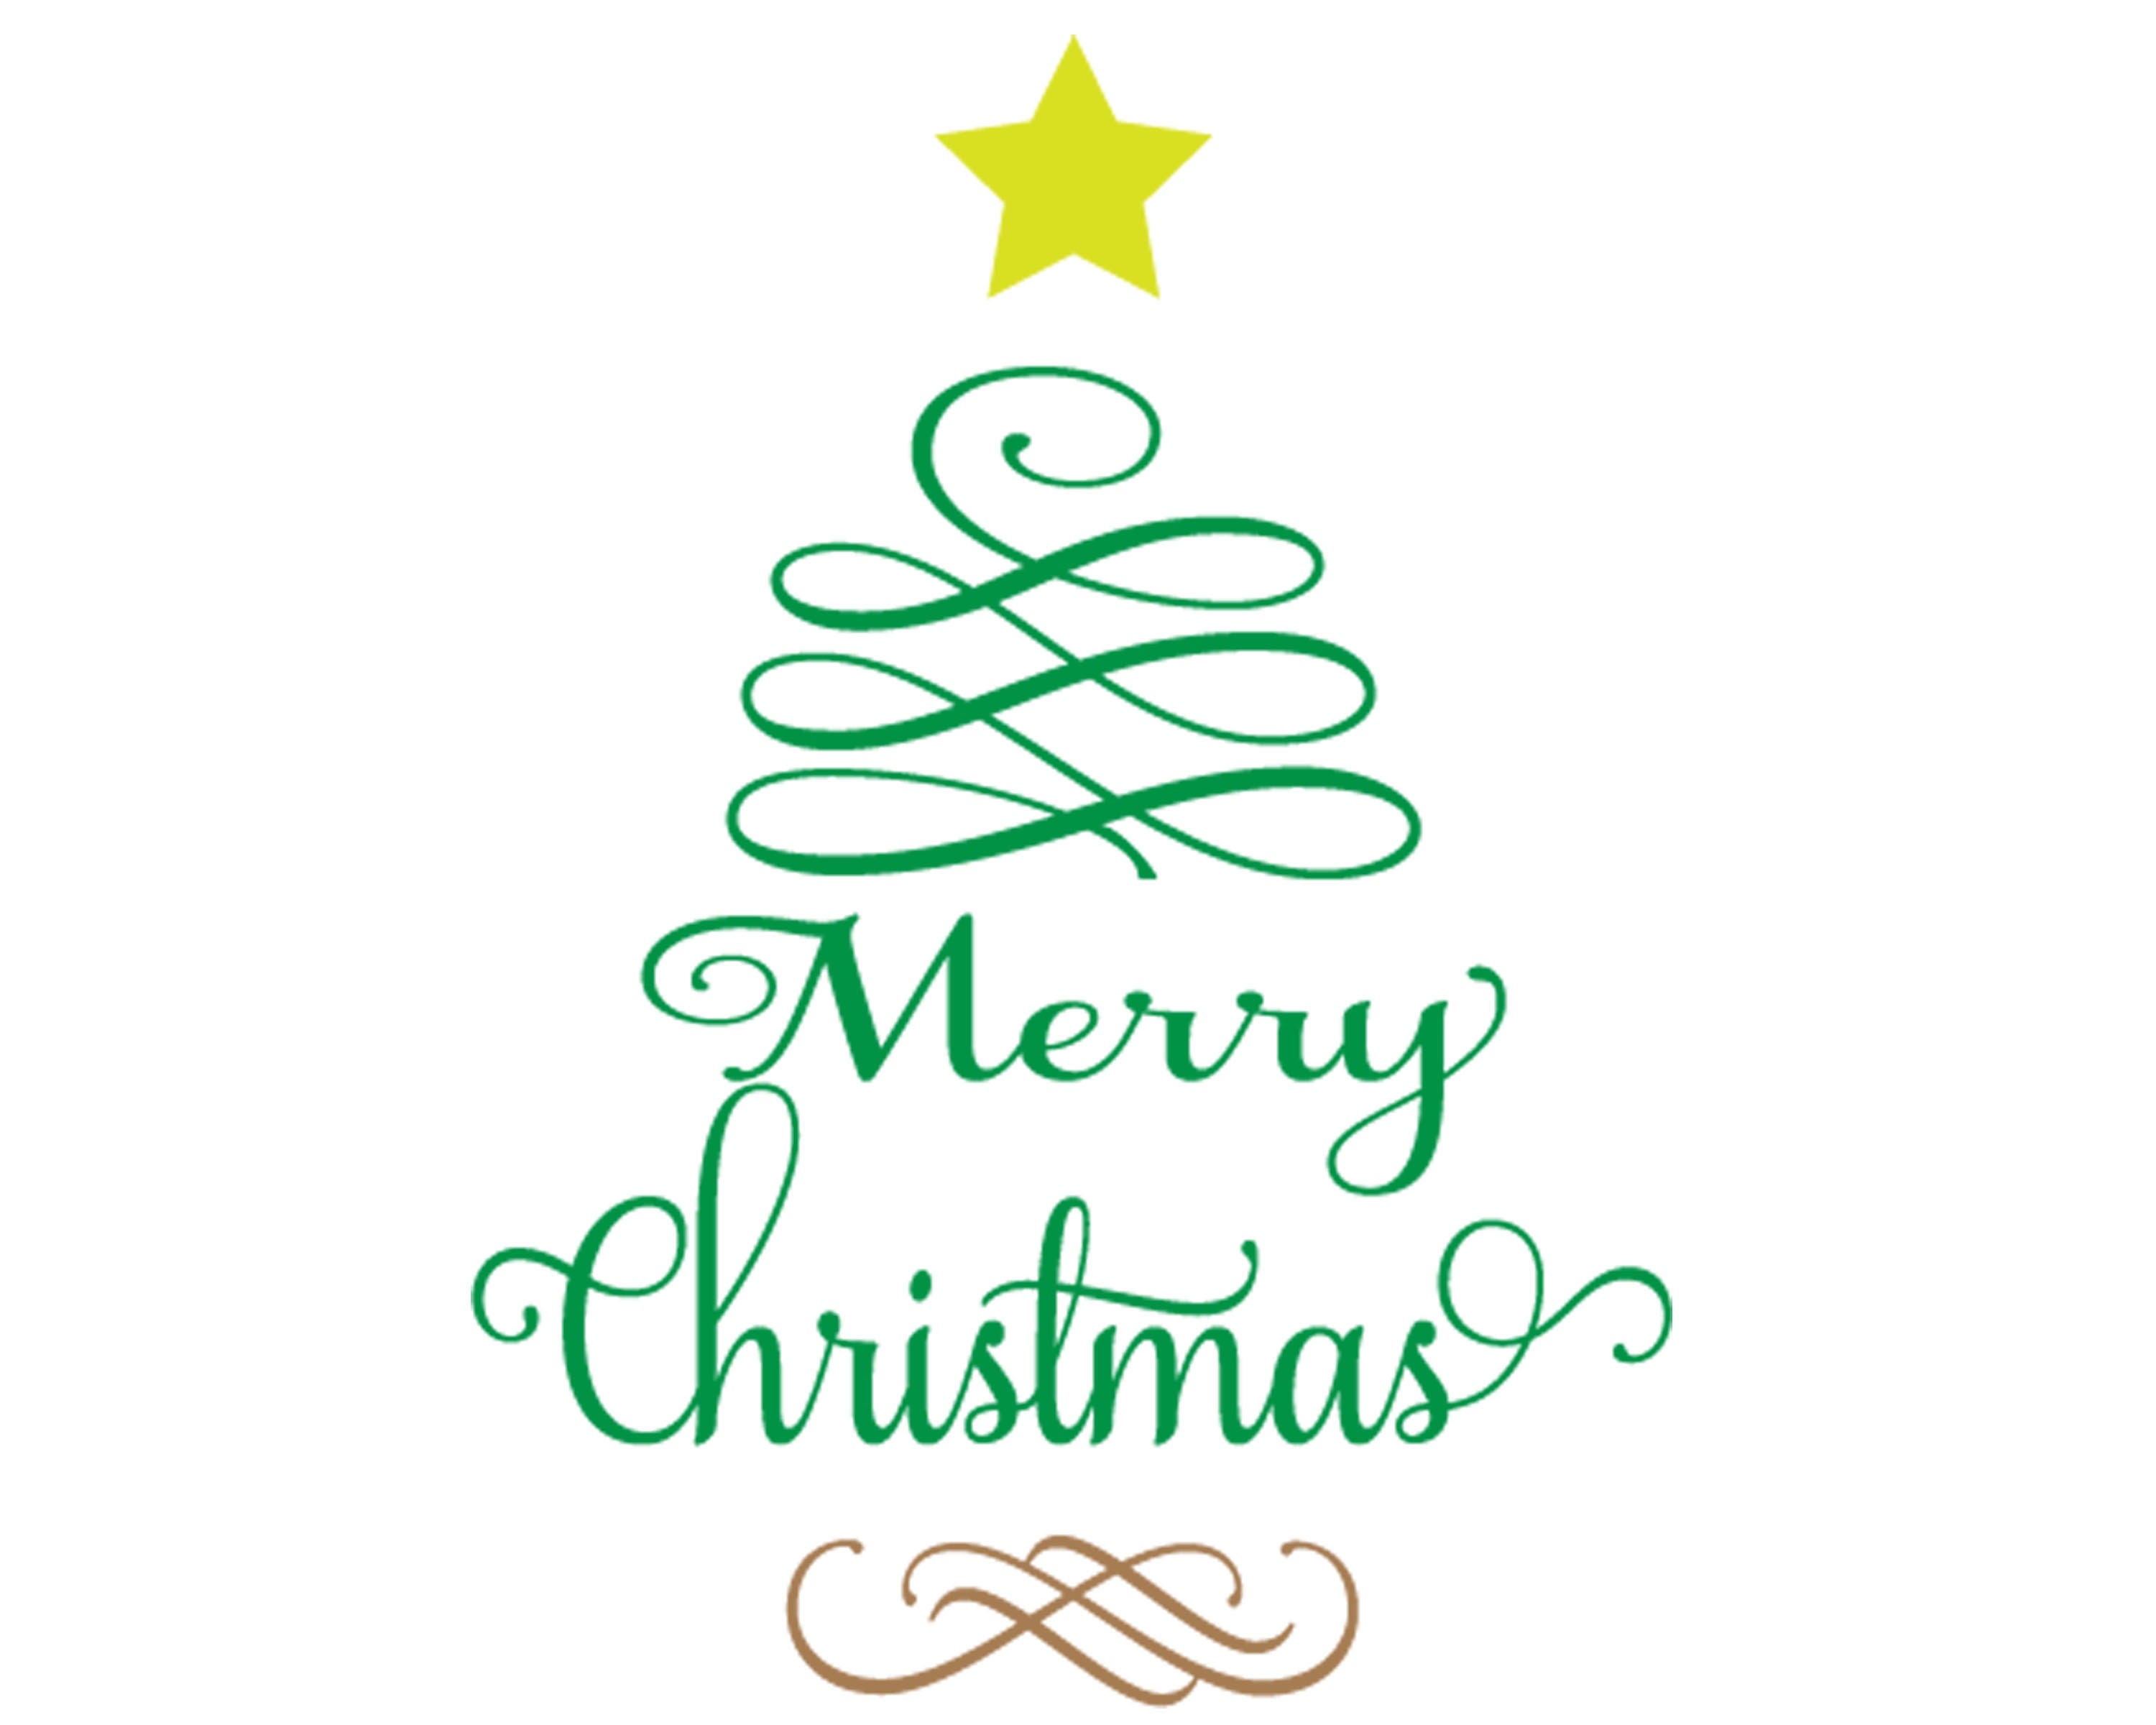 Merry Christmas svg | Christmas tree svg | Digital Download | eps png dxf